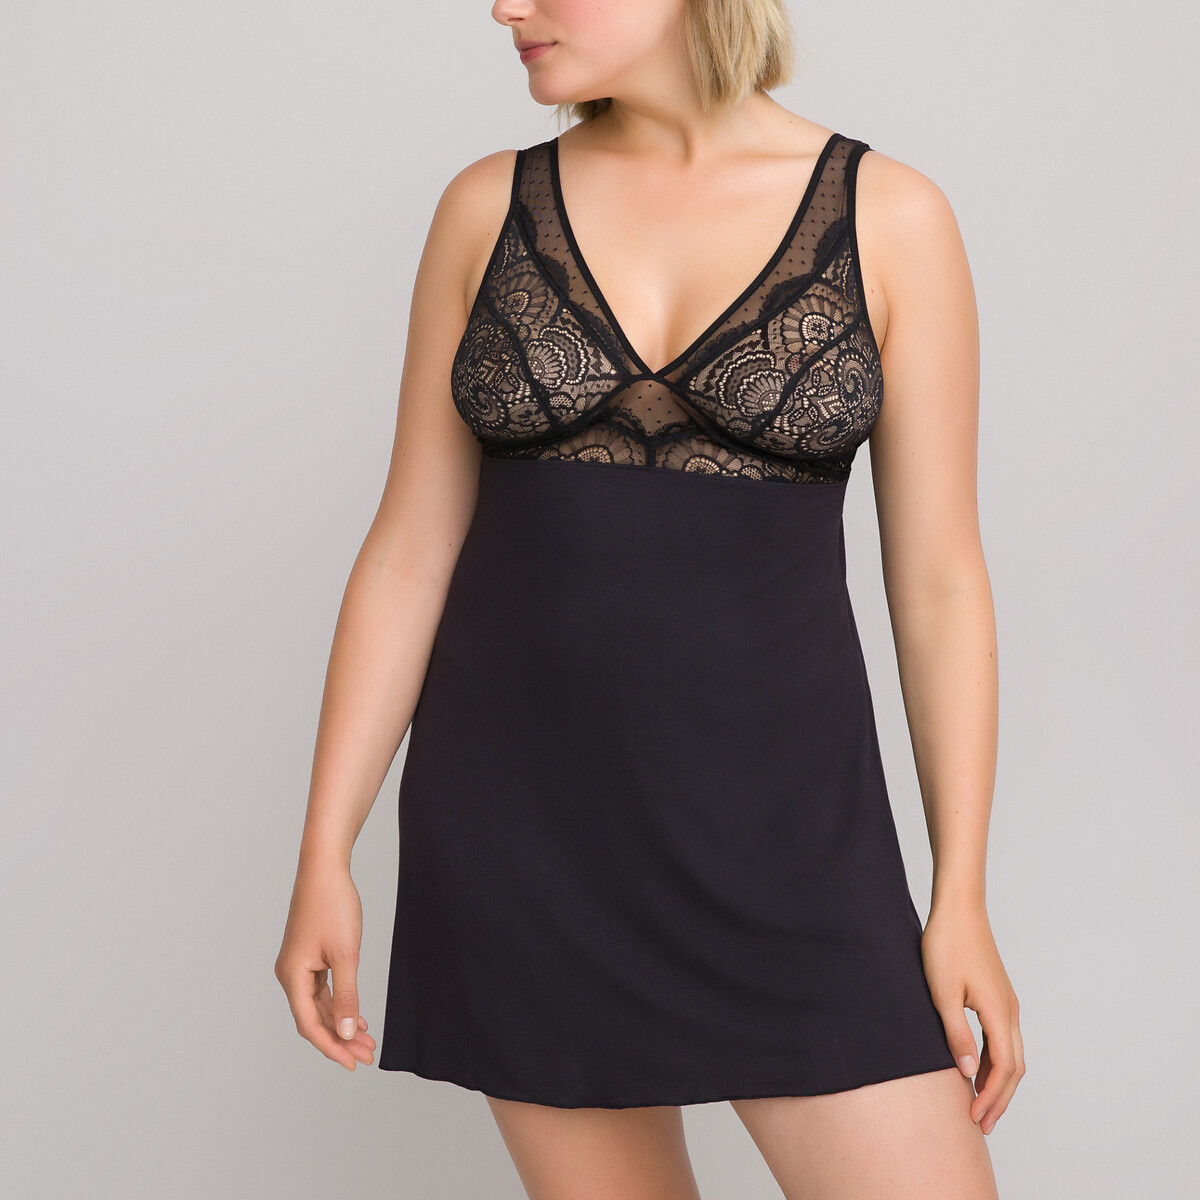 Draping Nightie with Lace and Dotte Details